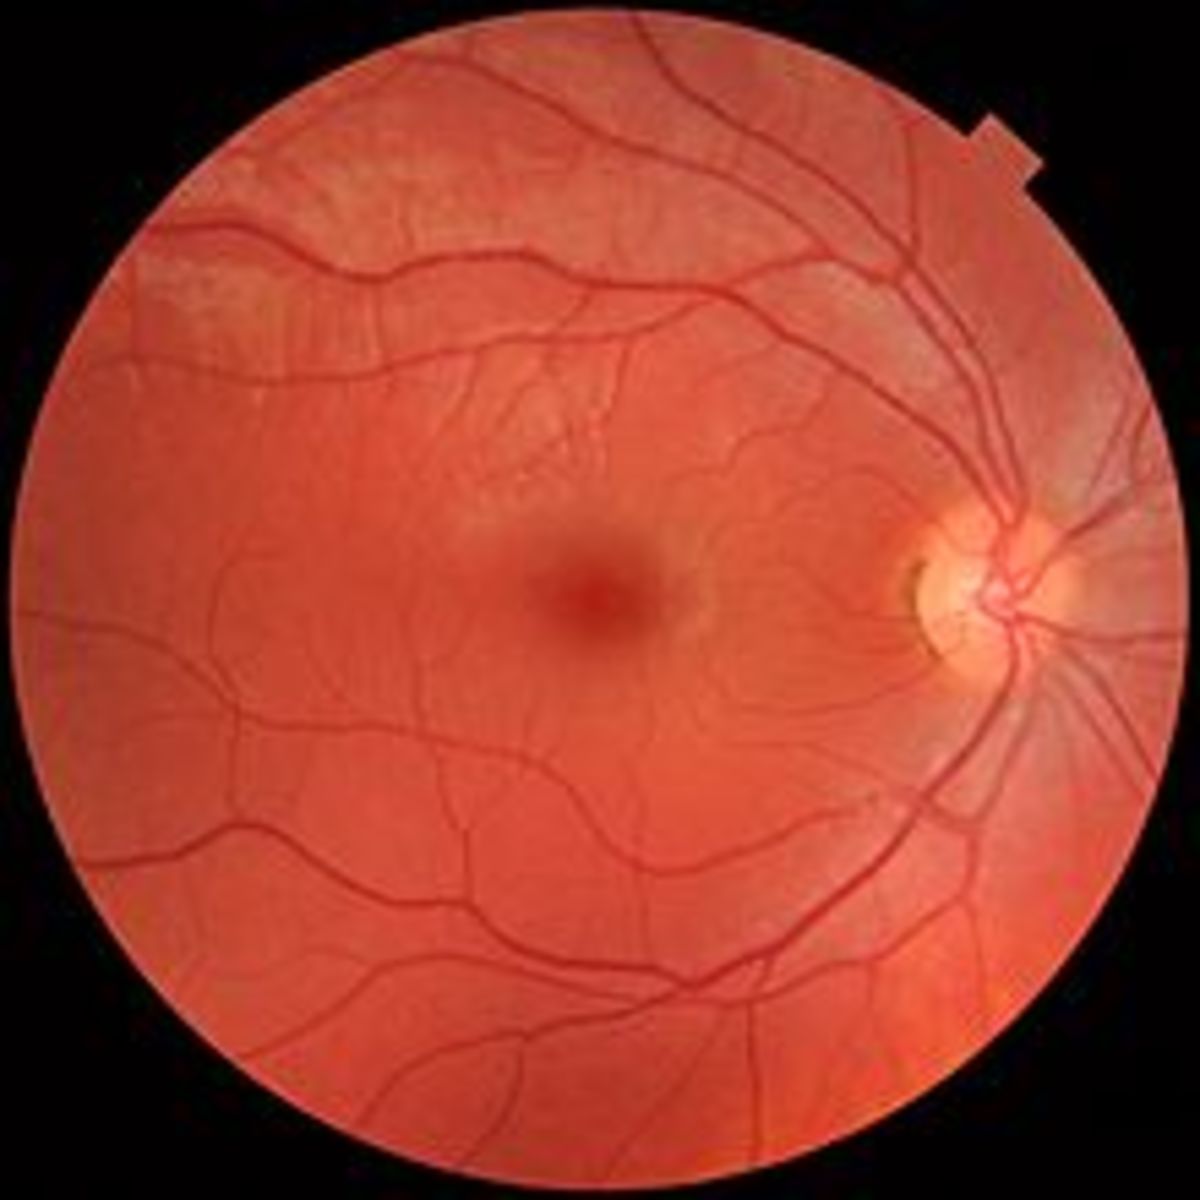 An image of the retina as seen by the ophthalmologist during an exam.